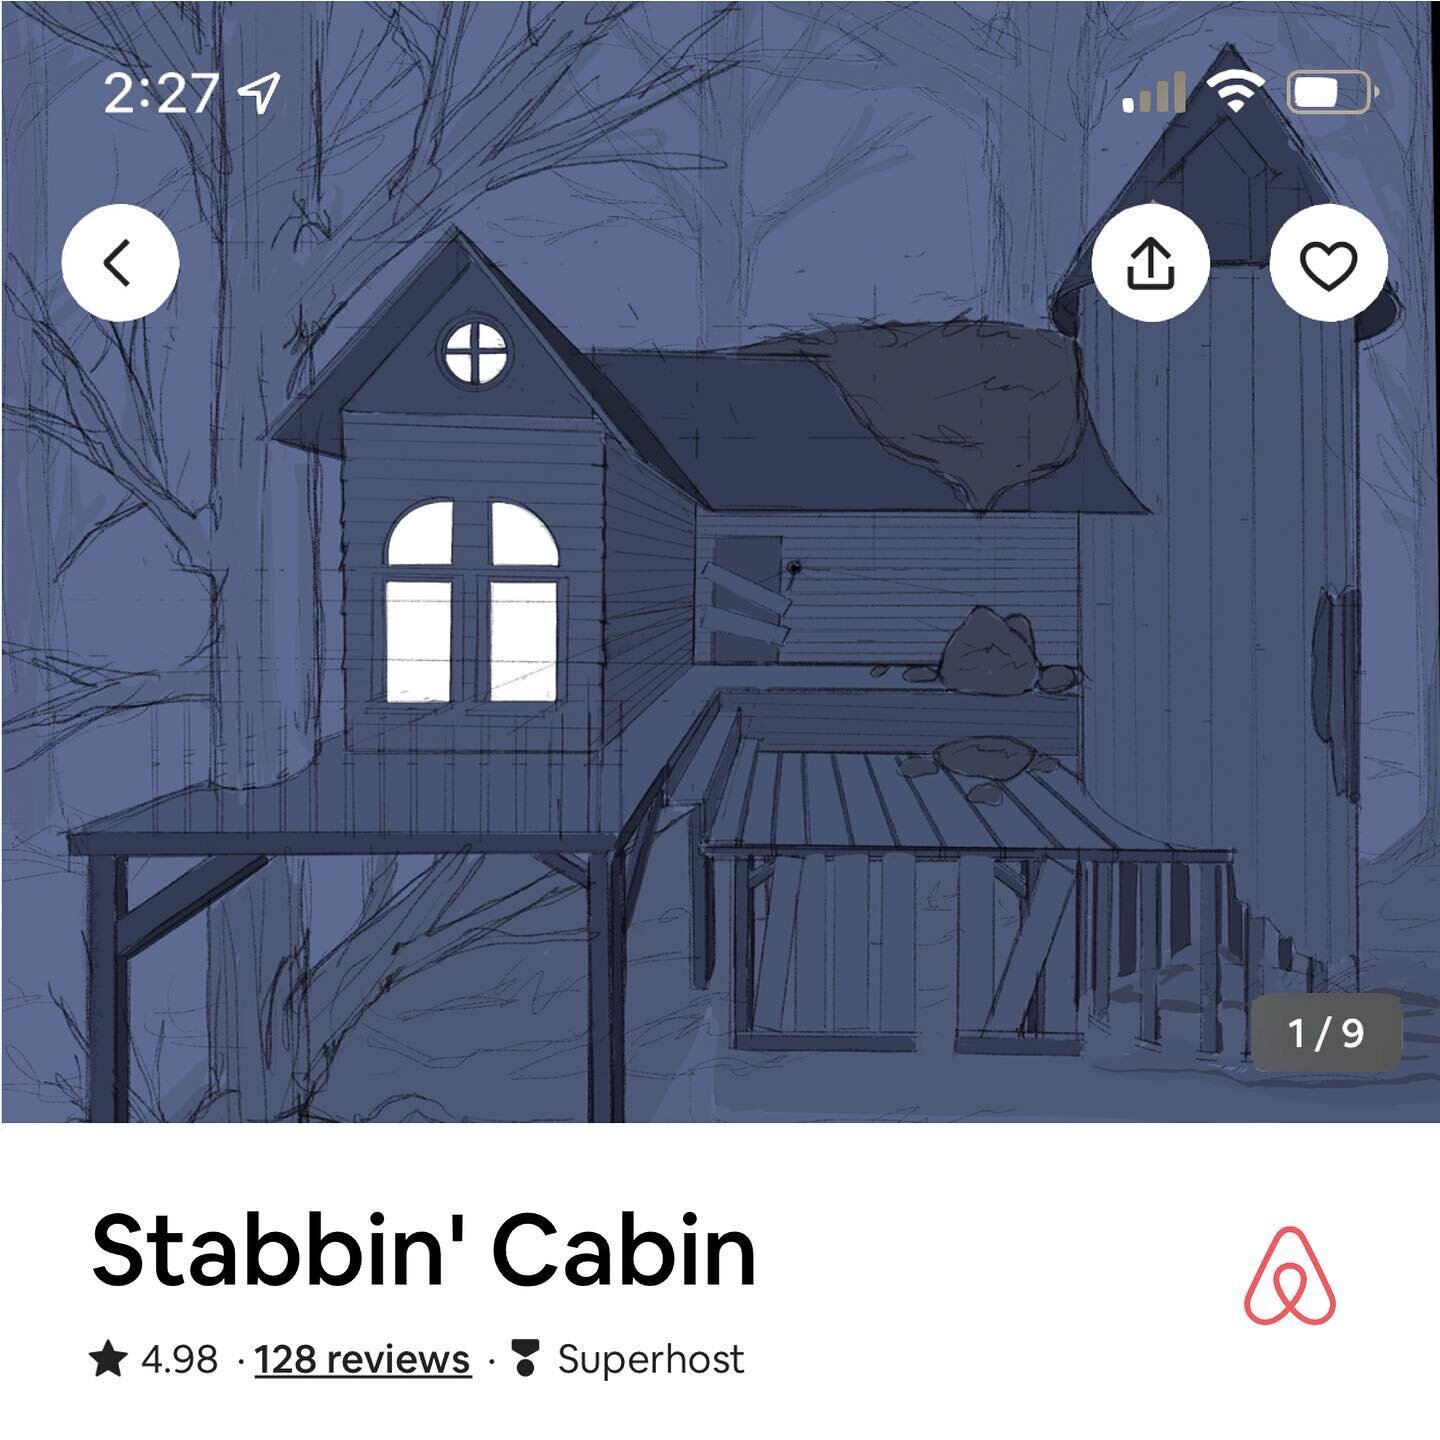 ⭐️⭐️⭐️⭐️⭐️
&ldquo;Had such a great stay at the Stabbin Cabin! Felt very safe with the doors boarded up. The ethereal chanting coming from the walls created the perfect zen ambiance for a restful night&rsquo;s sleep!&rdquo; - Ash W., TN 

#cabin #blue